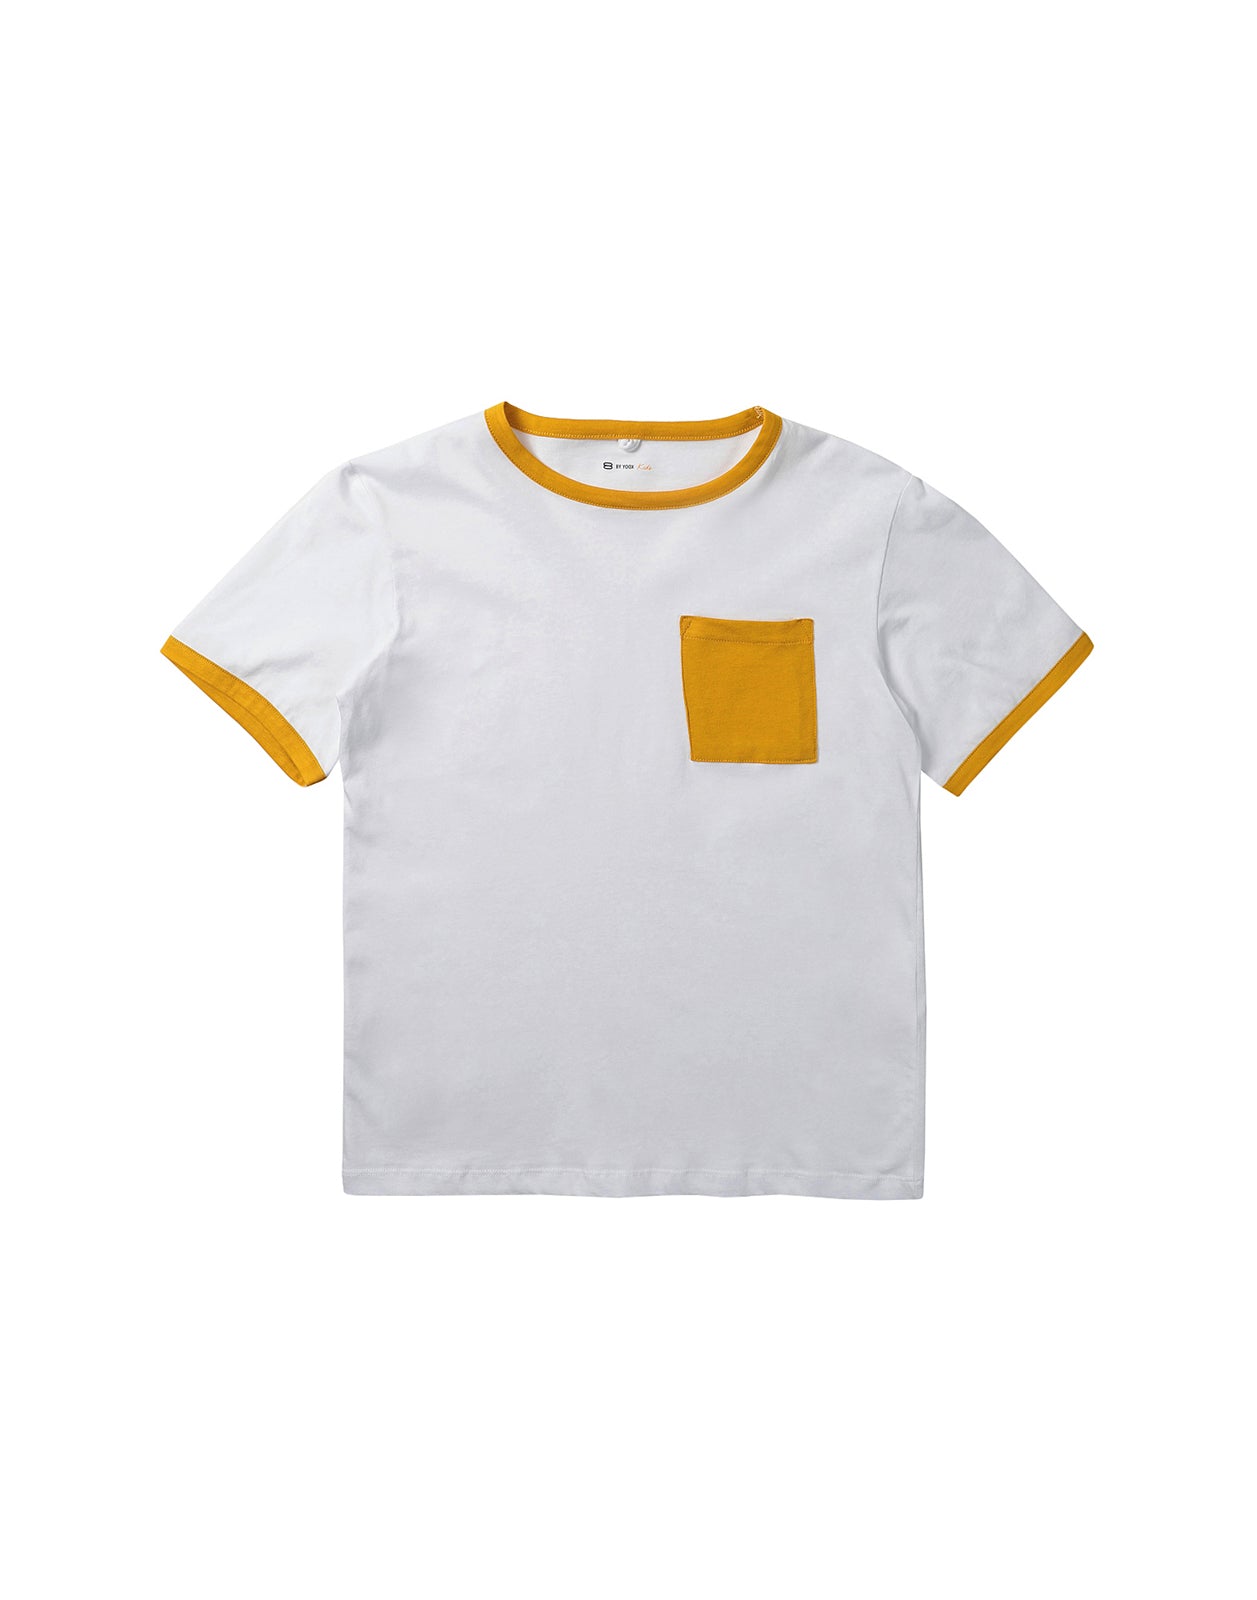 8 KIDS T-Shirt Top Size 12Y Chest Pocket Short Sleeve Made in Portugal gallery main photo